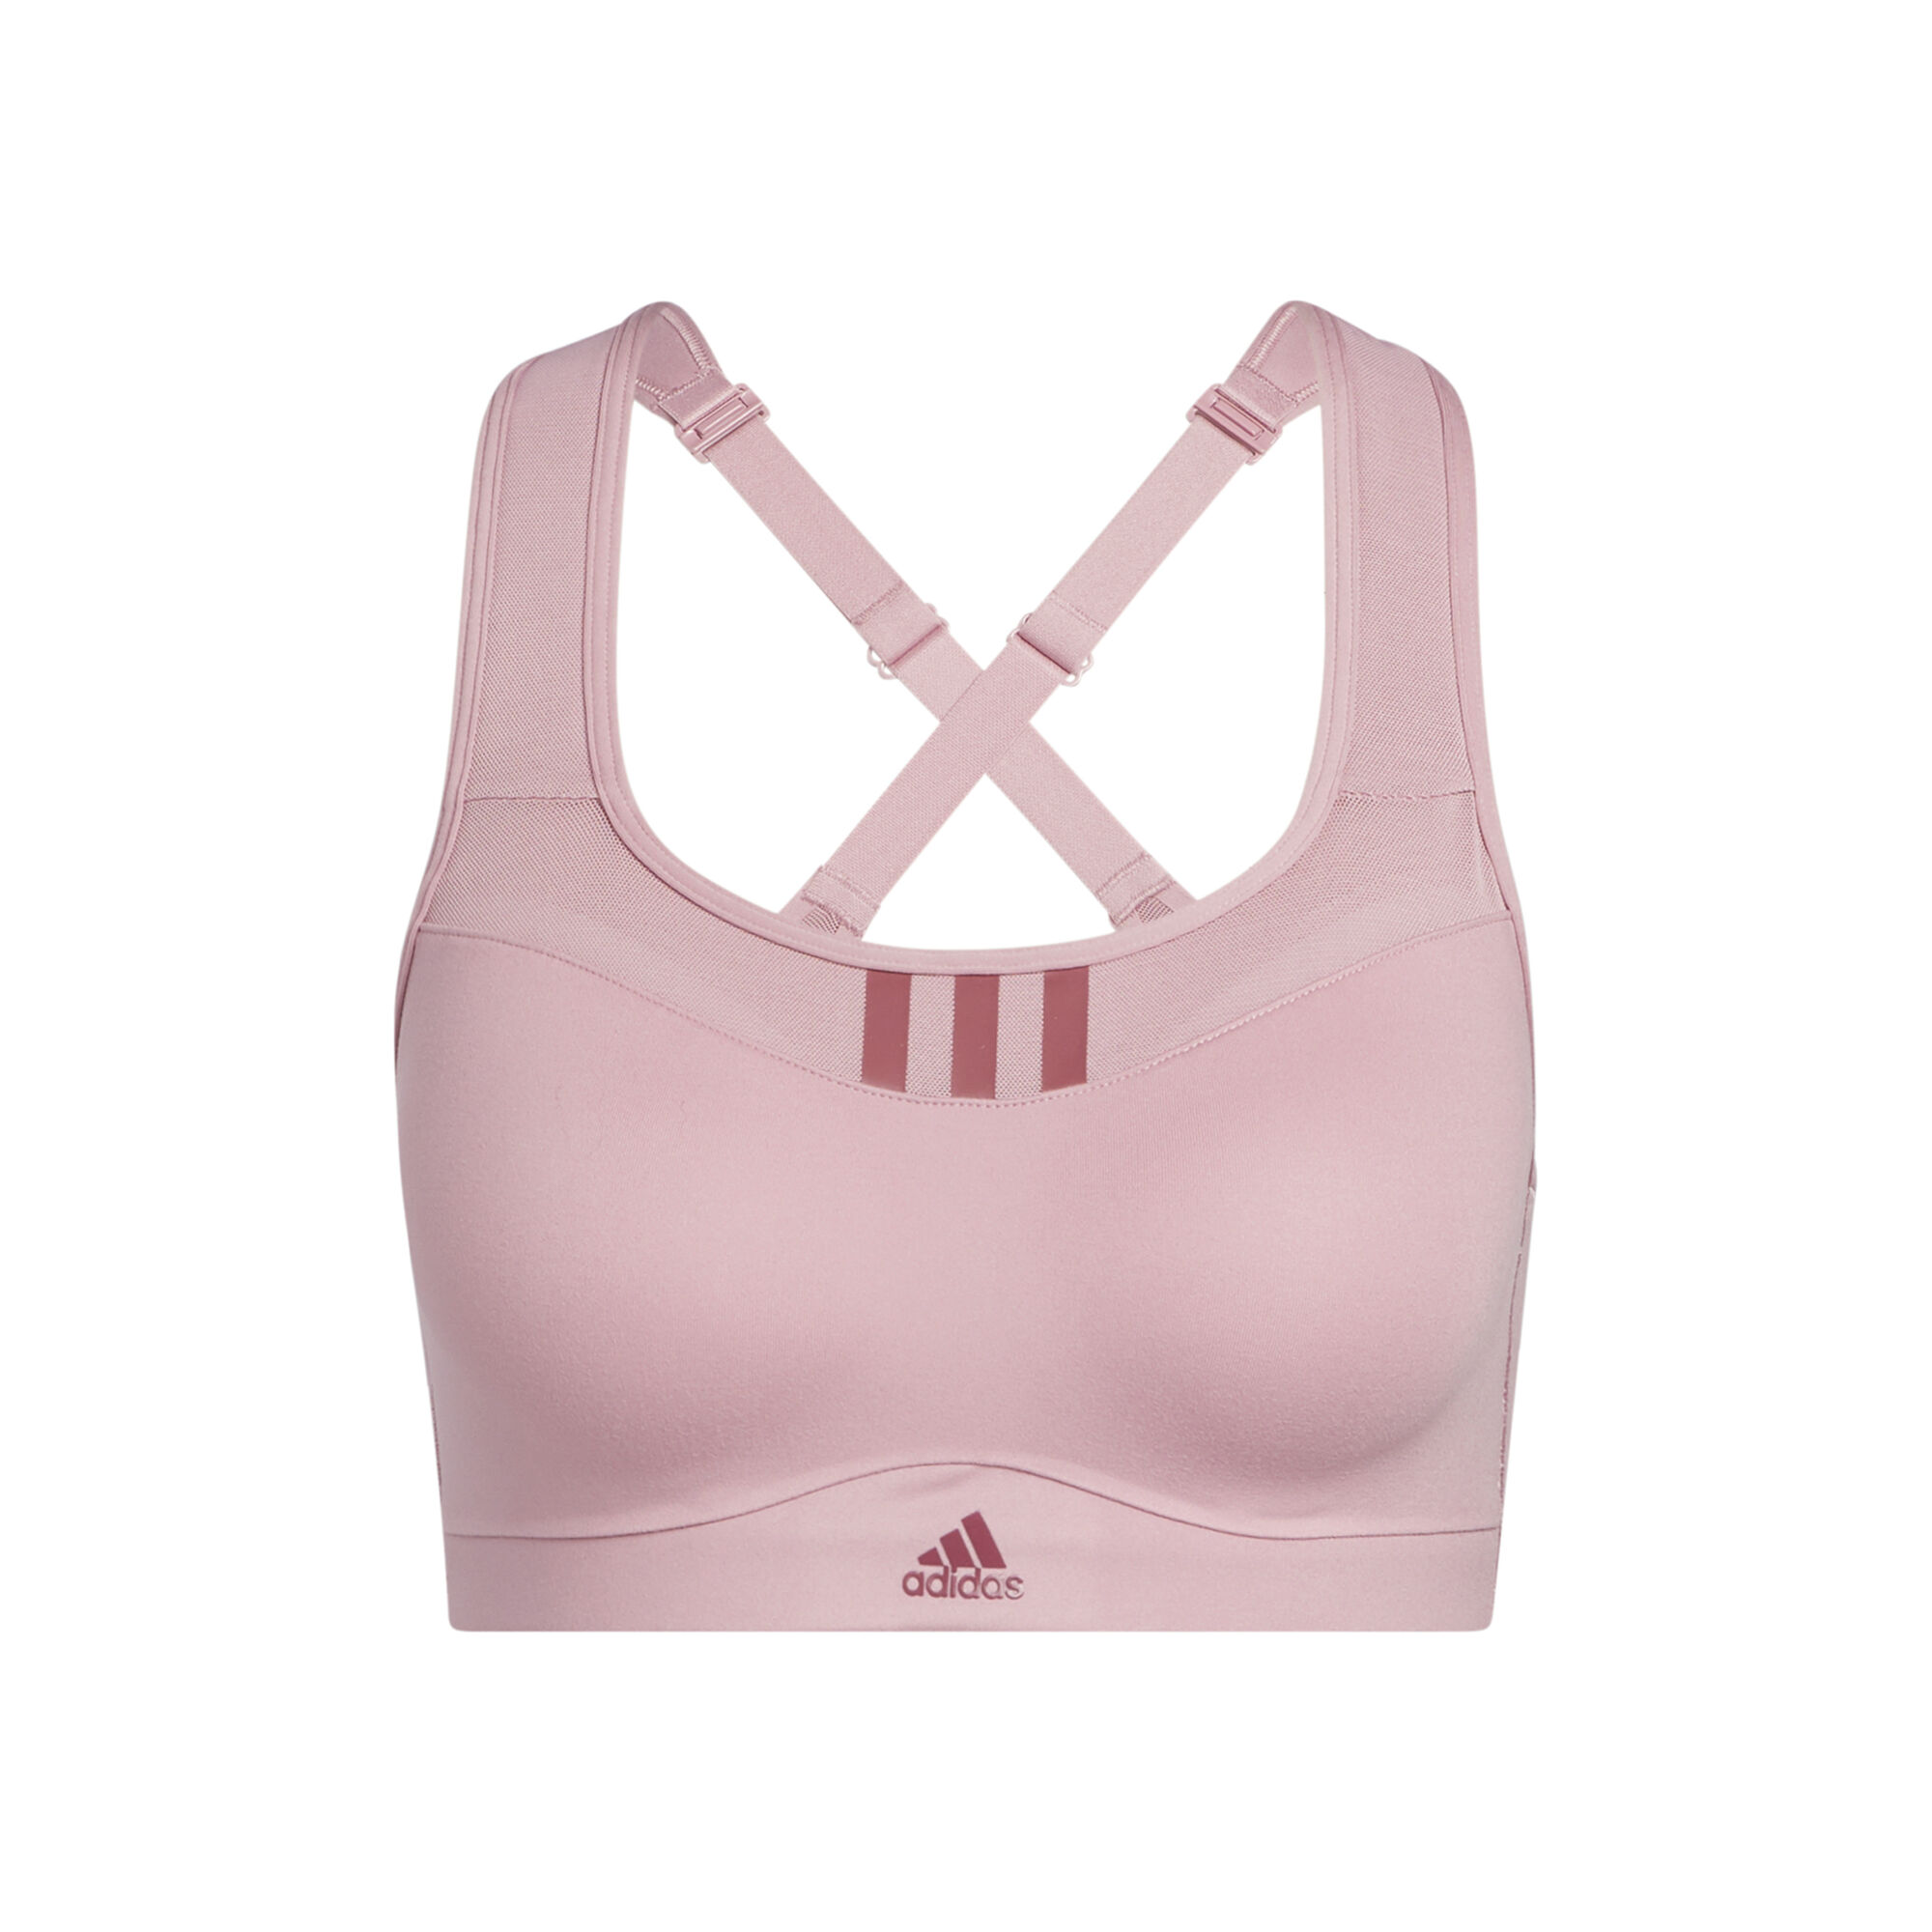 Buy adidas TLRD Impact High-Support Sports Bras Women Violet online